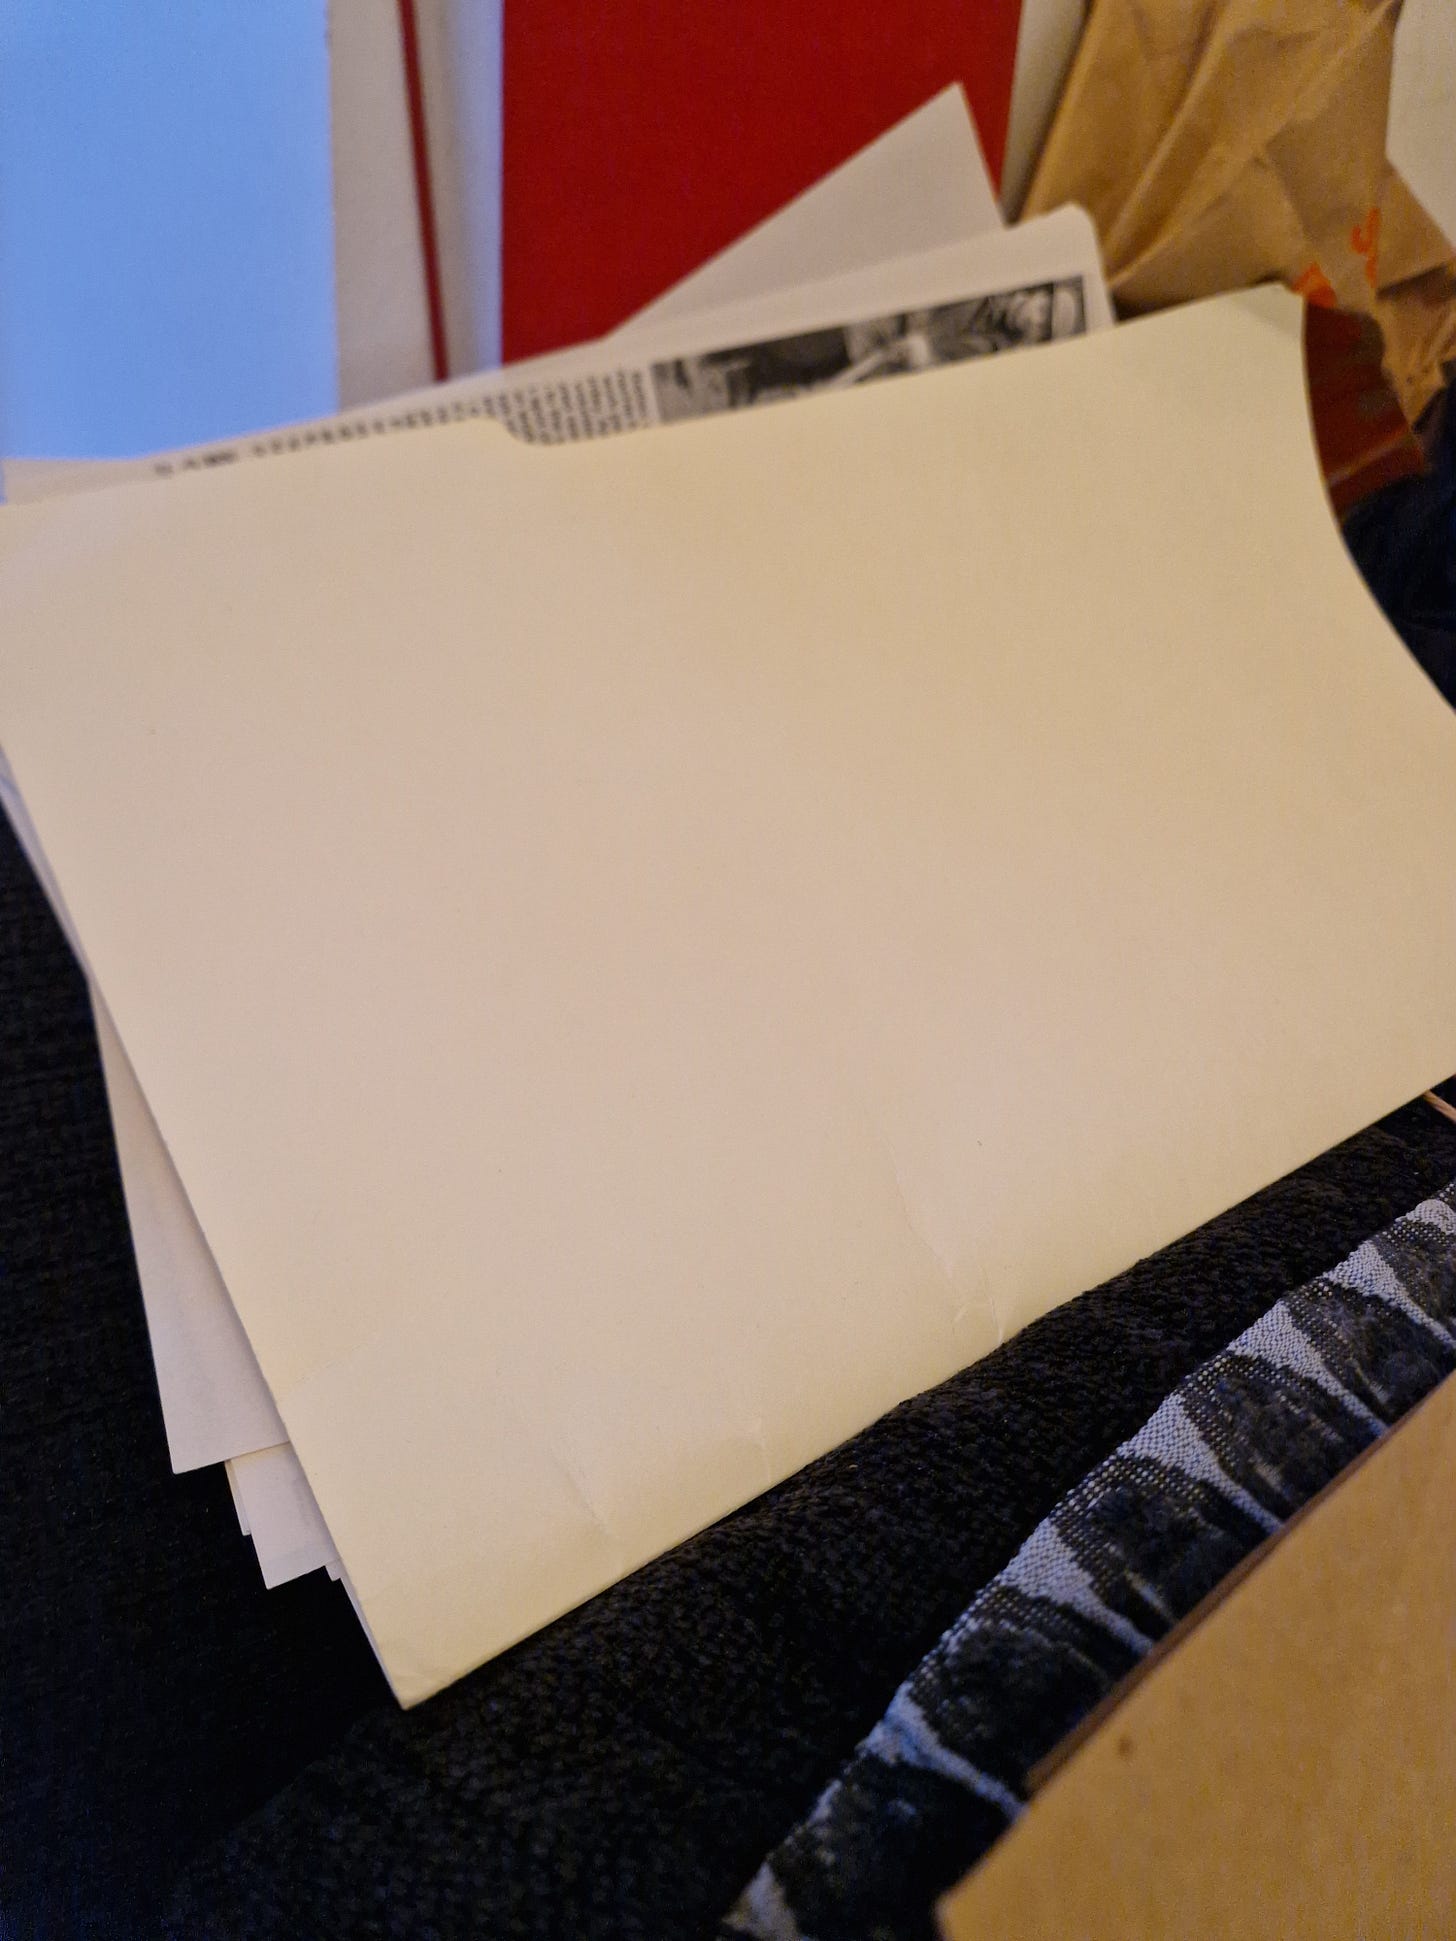 A cream coloured folder holding a lot of newspaper clippings for digitising and cataloguing